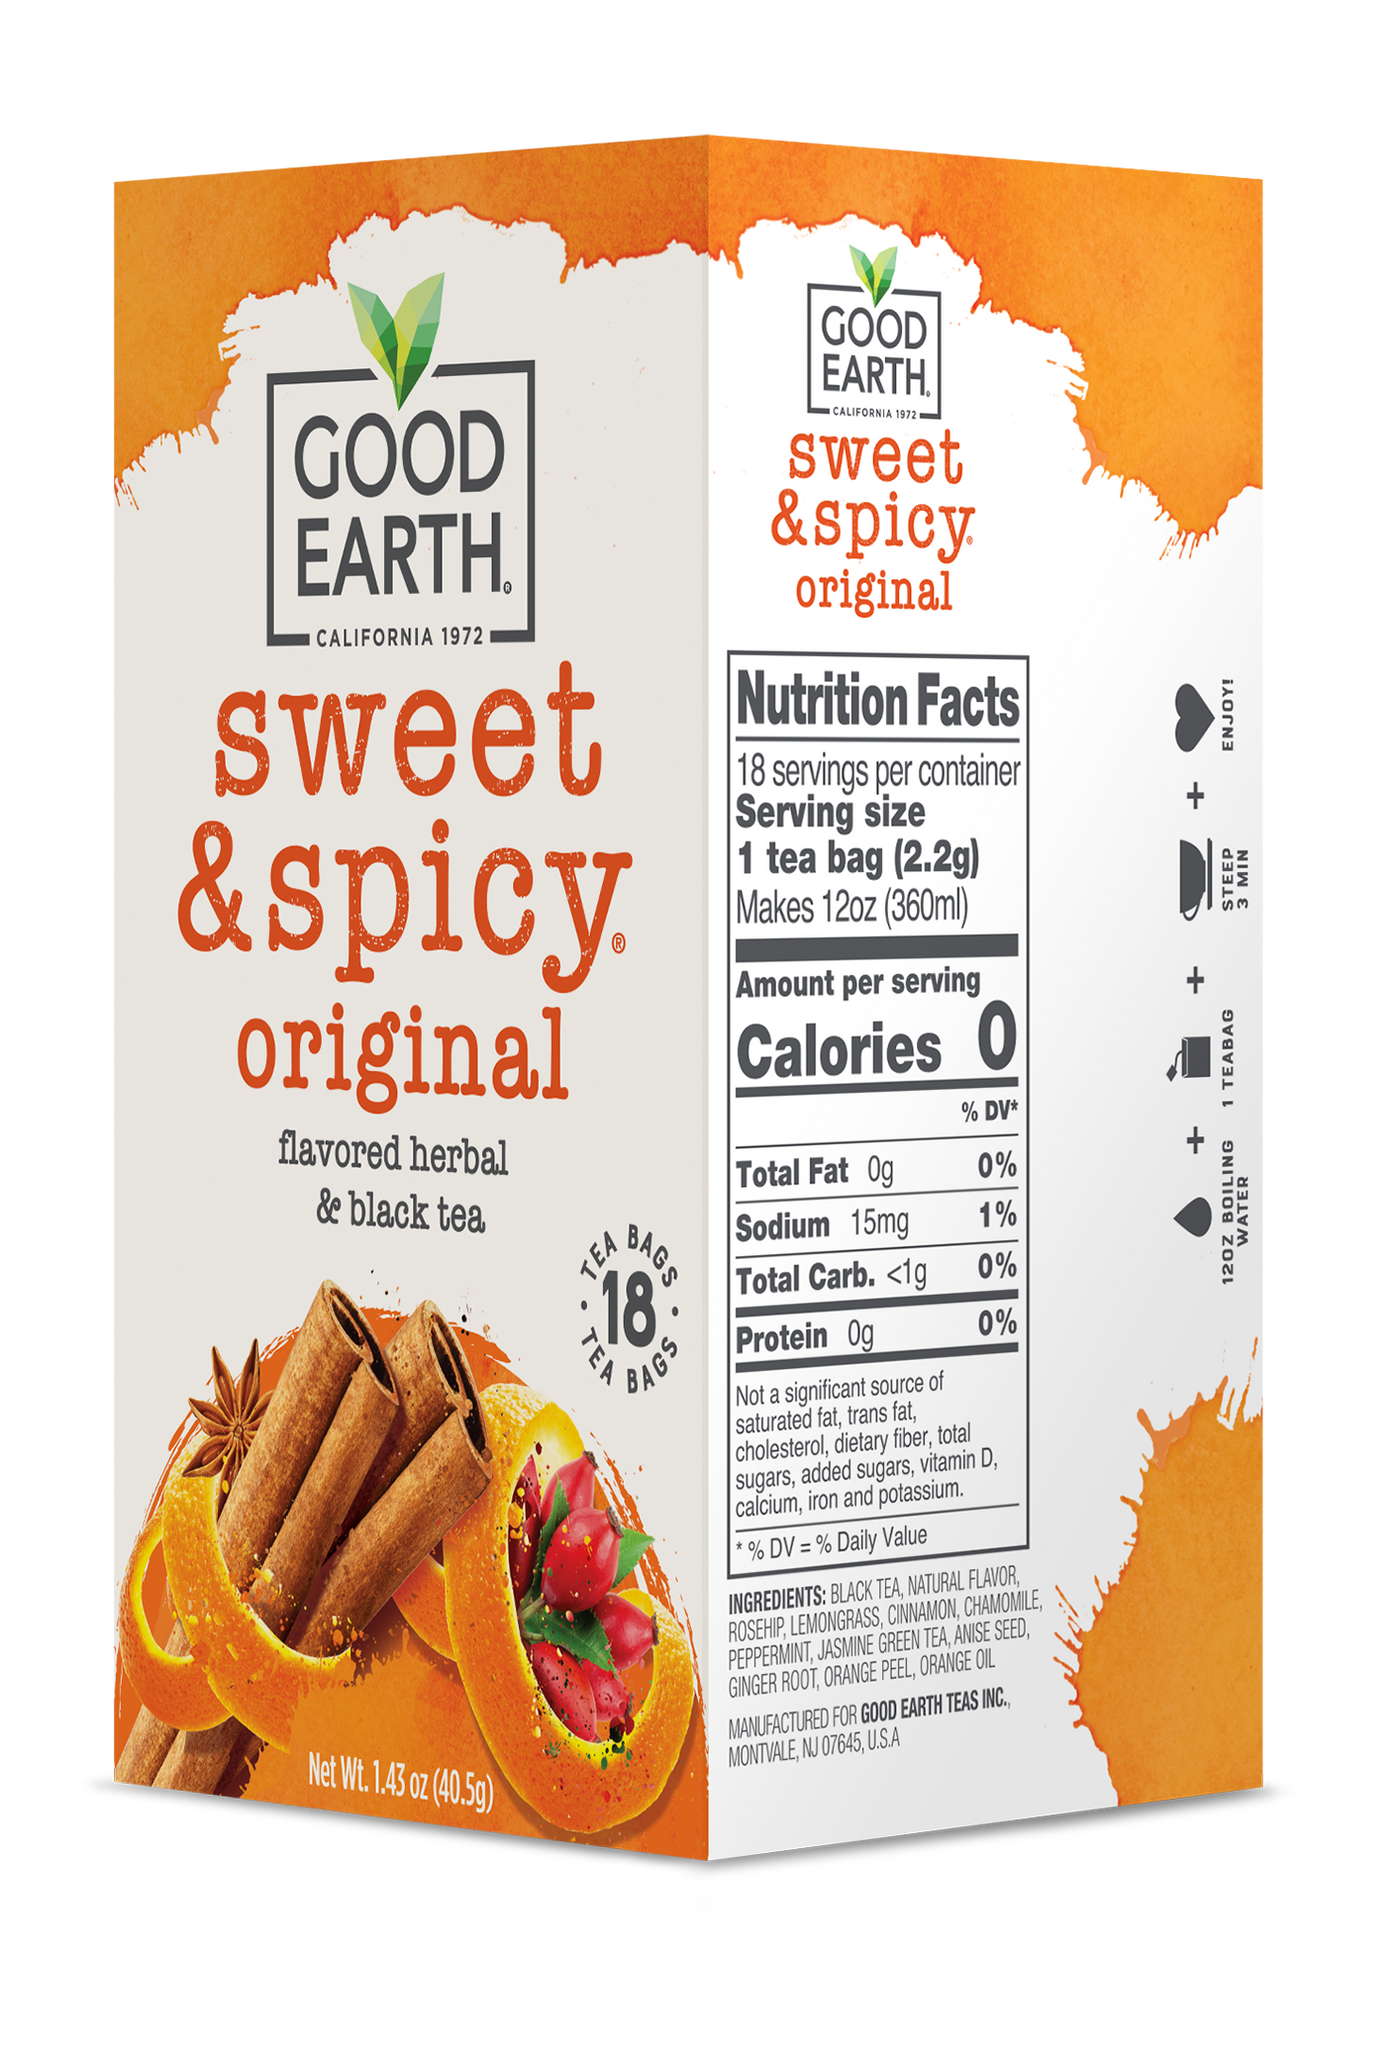 Sweet & Spicy Original Nutrition Facts see below 